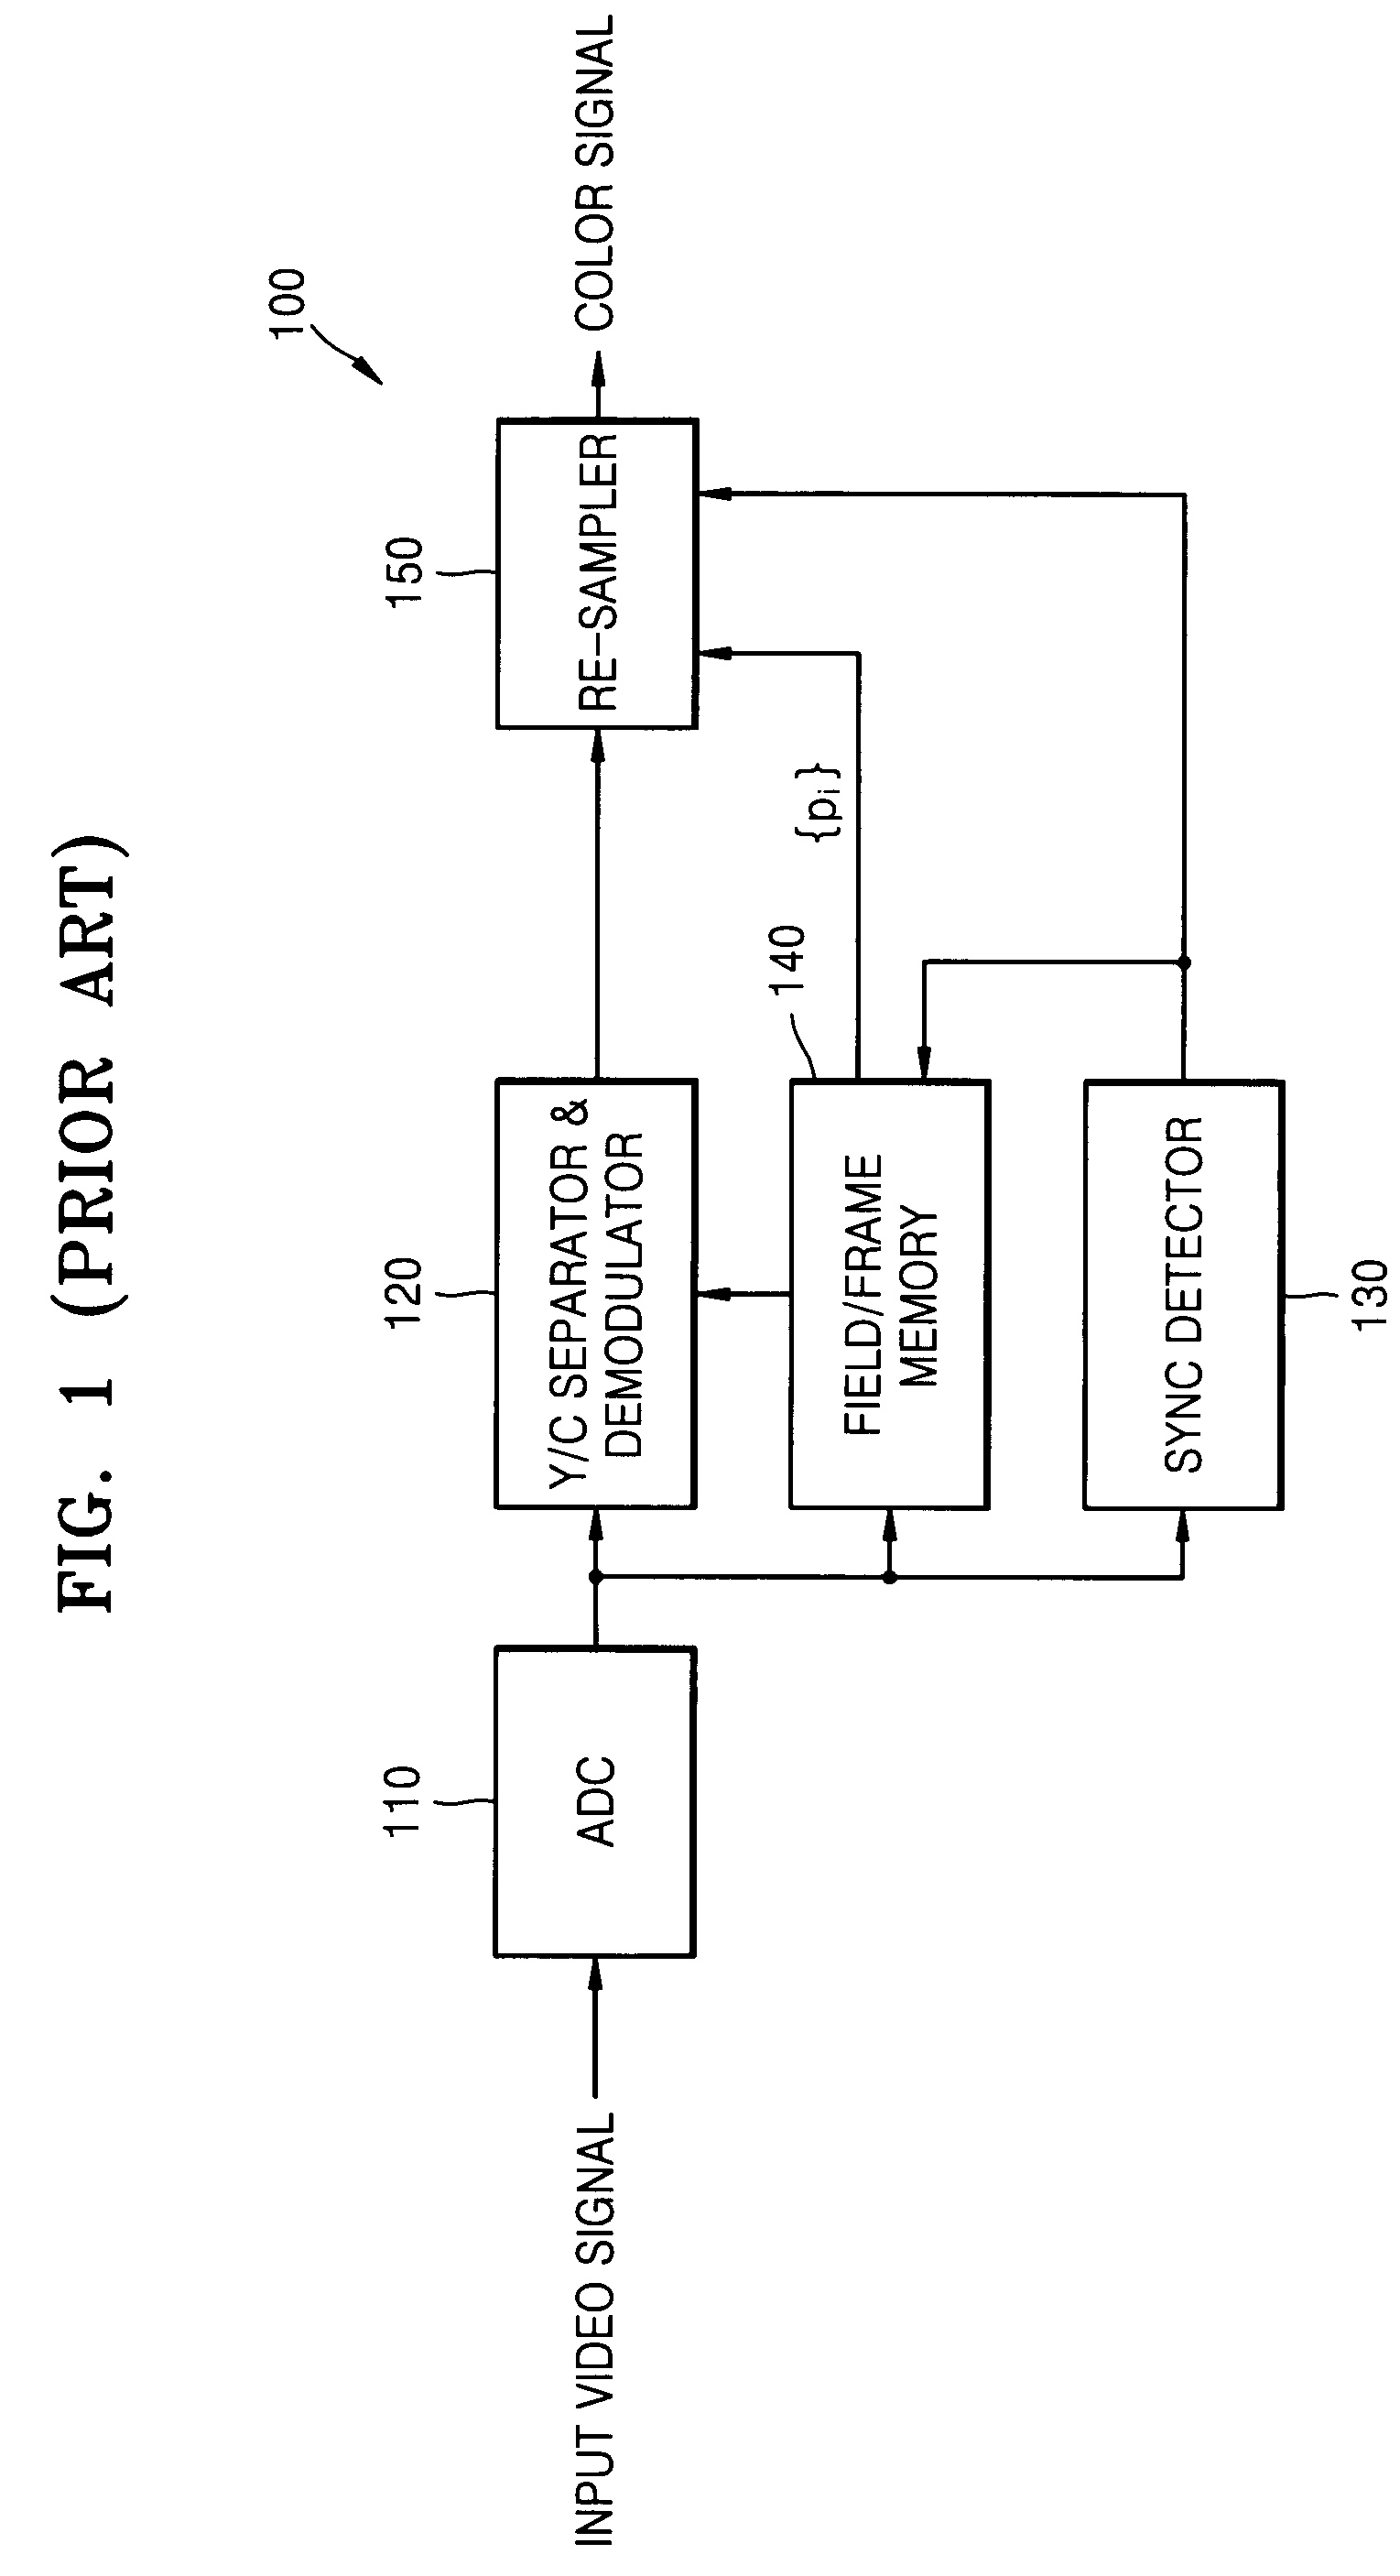 Video processing apparatus and methods using selectively modified sync positions